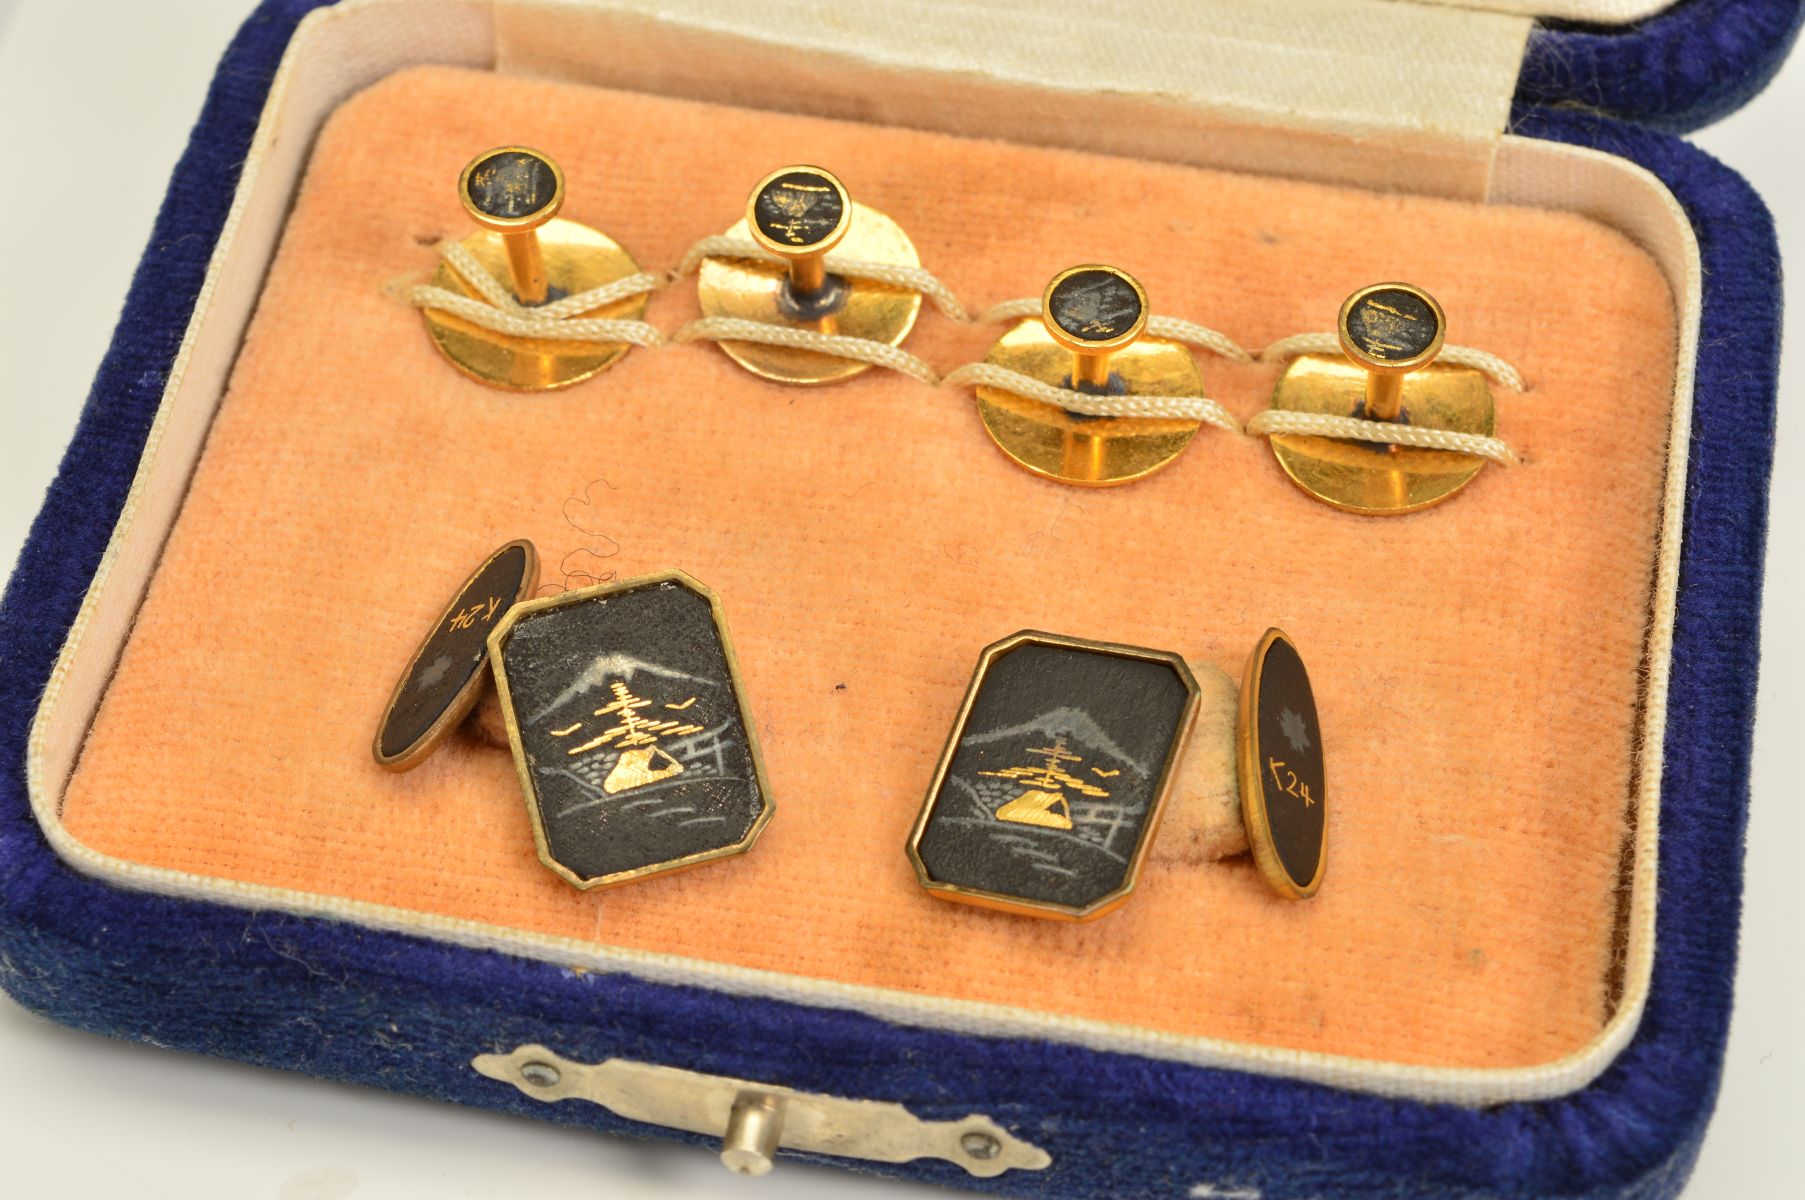 A CASED SET OF DAMASCENE CUFFLINKS AND STUDS, to include four circular studs and a pair of chain